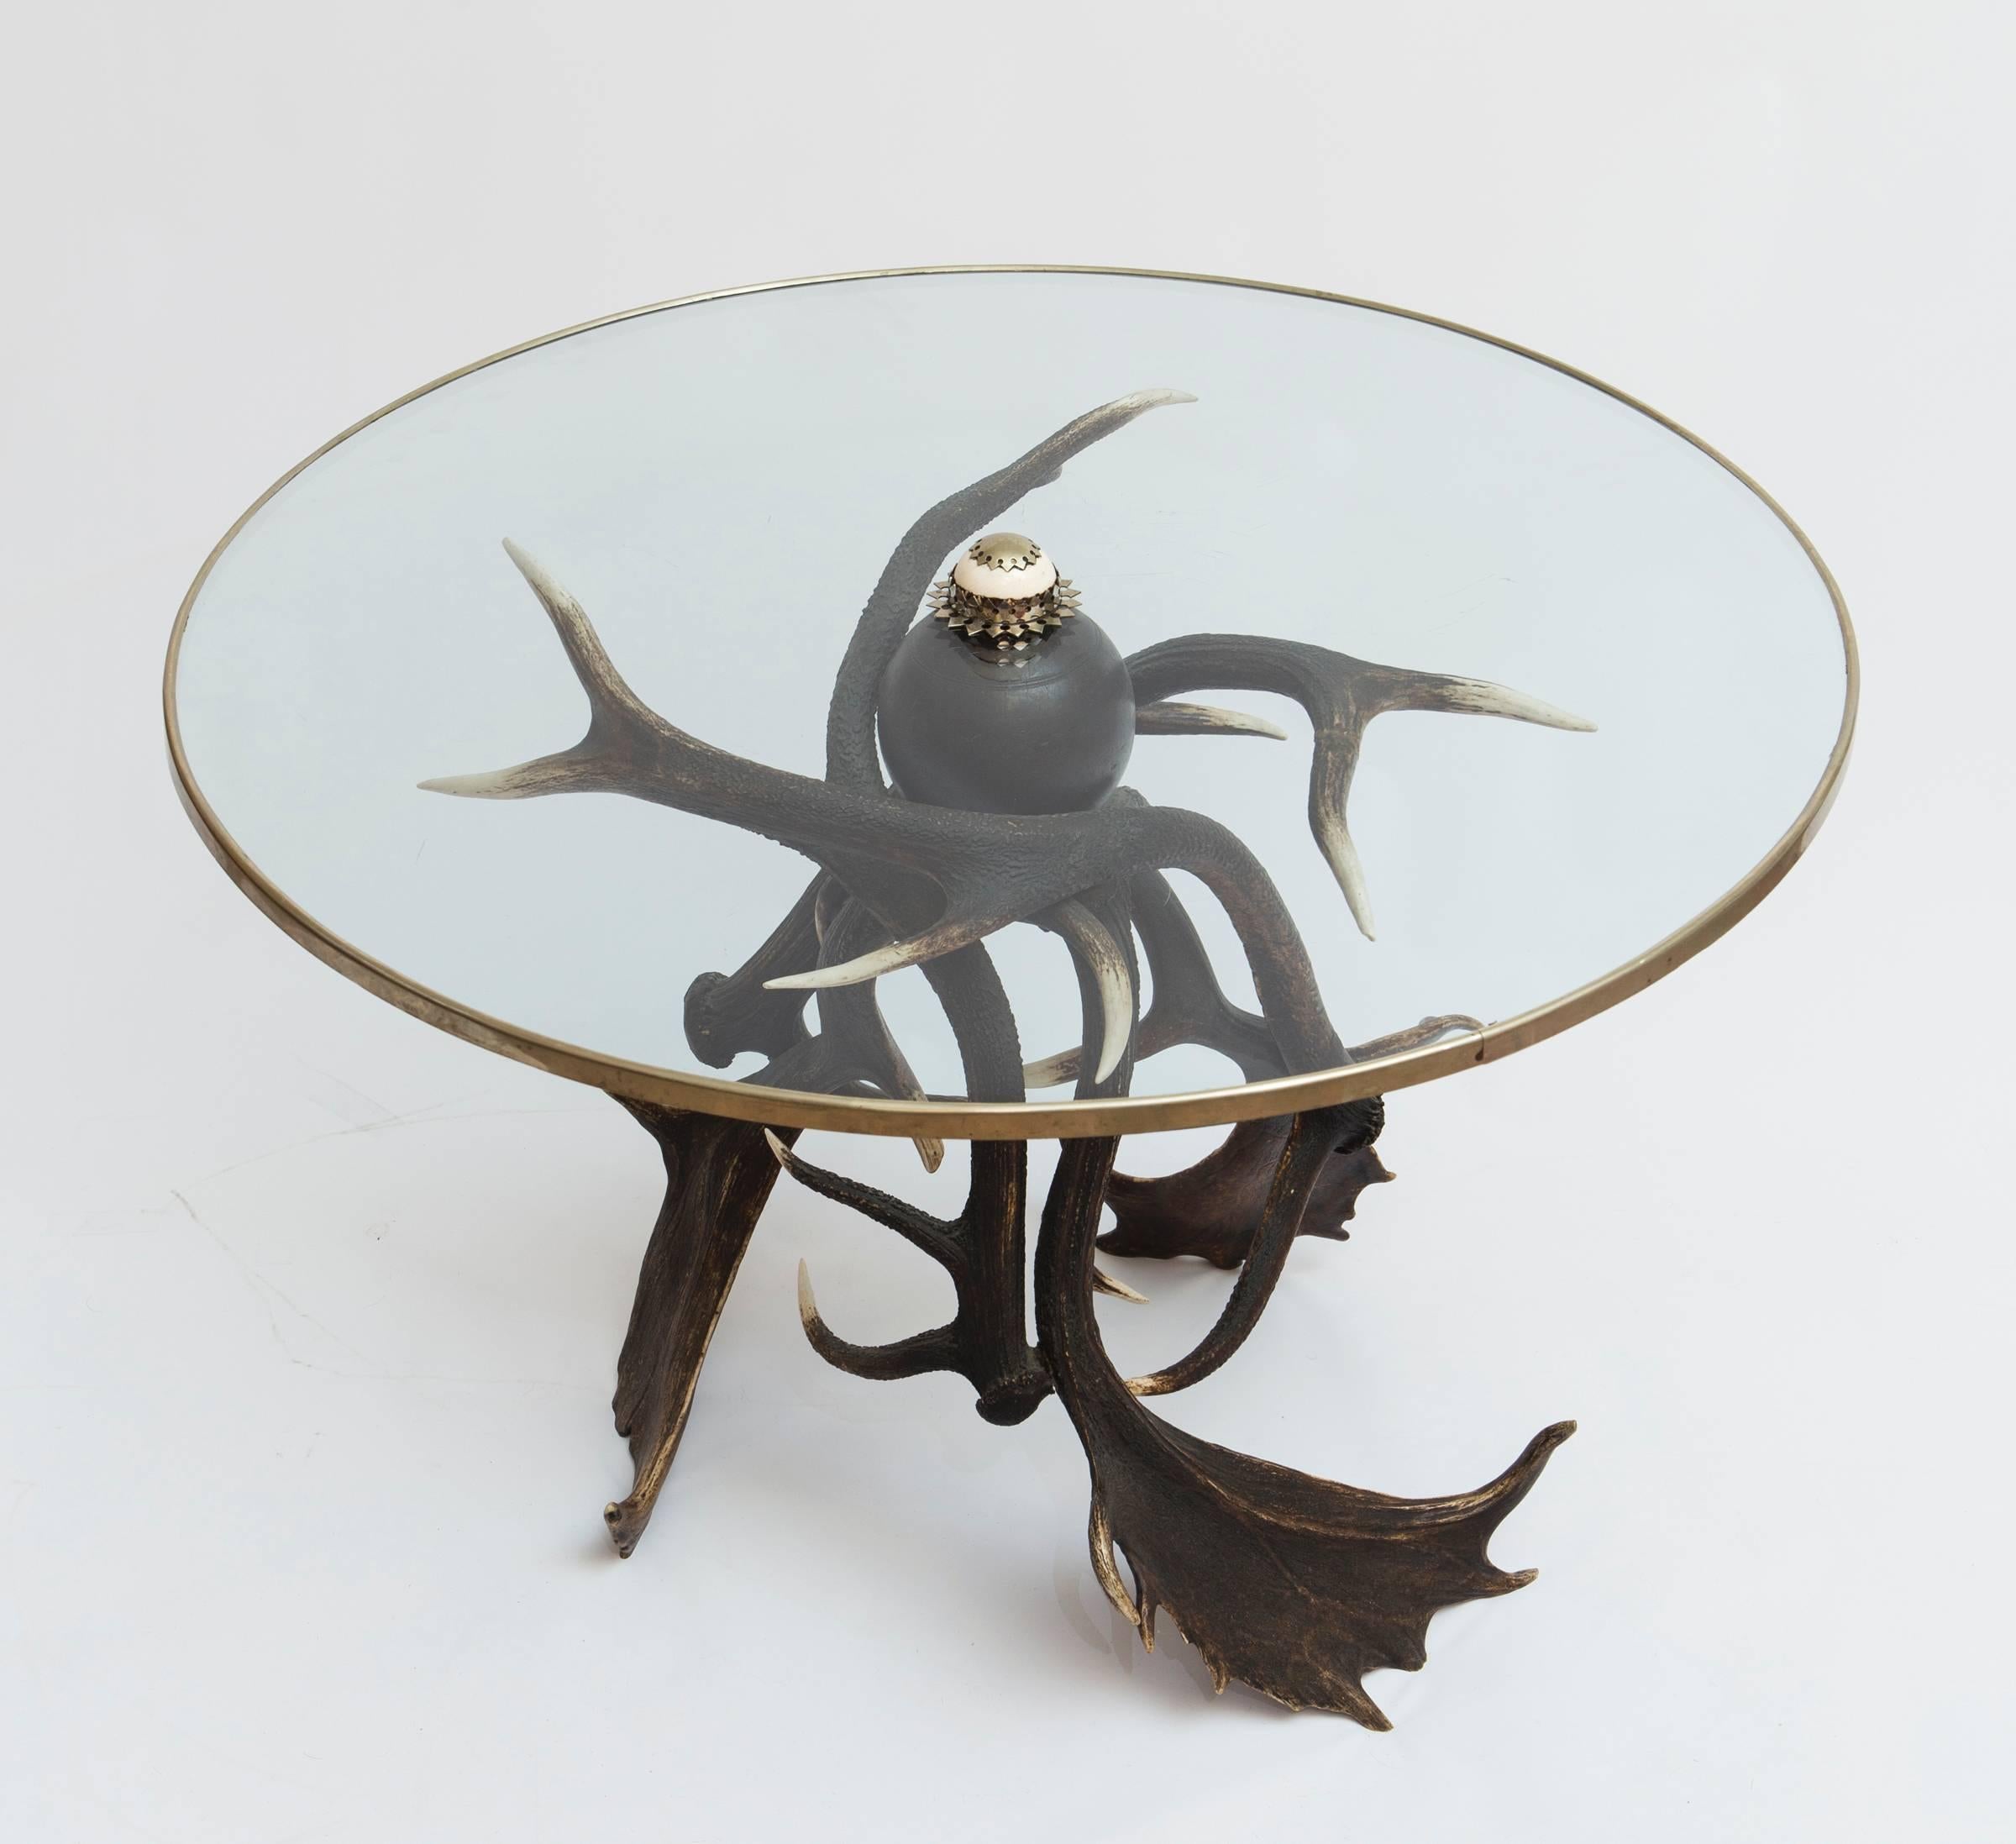 This is a unique antler based side table with a glass top with brass rim.  The table is beautifully made. 